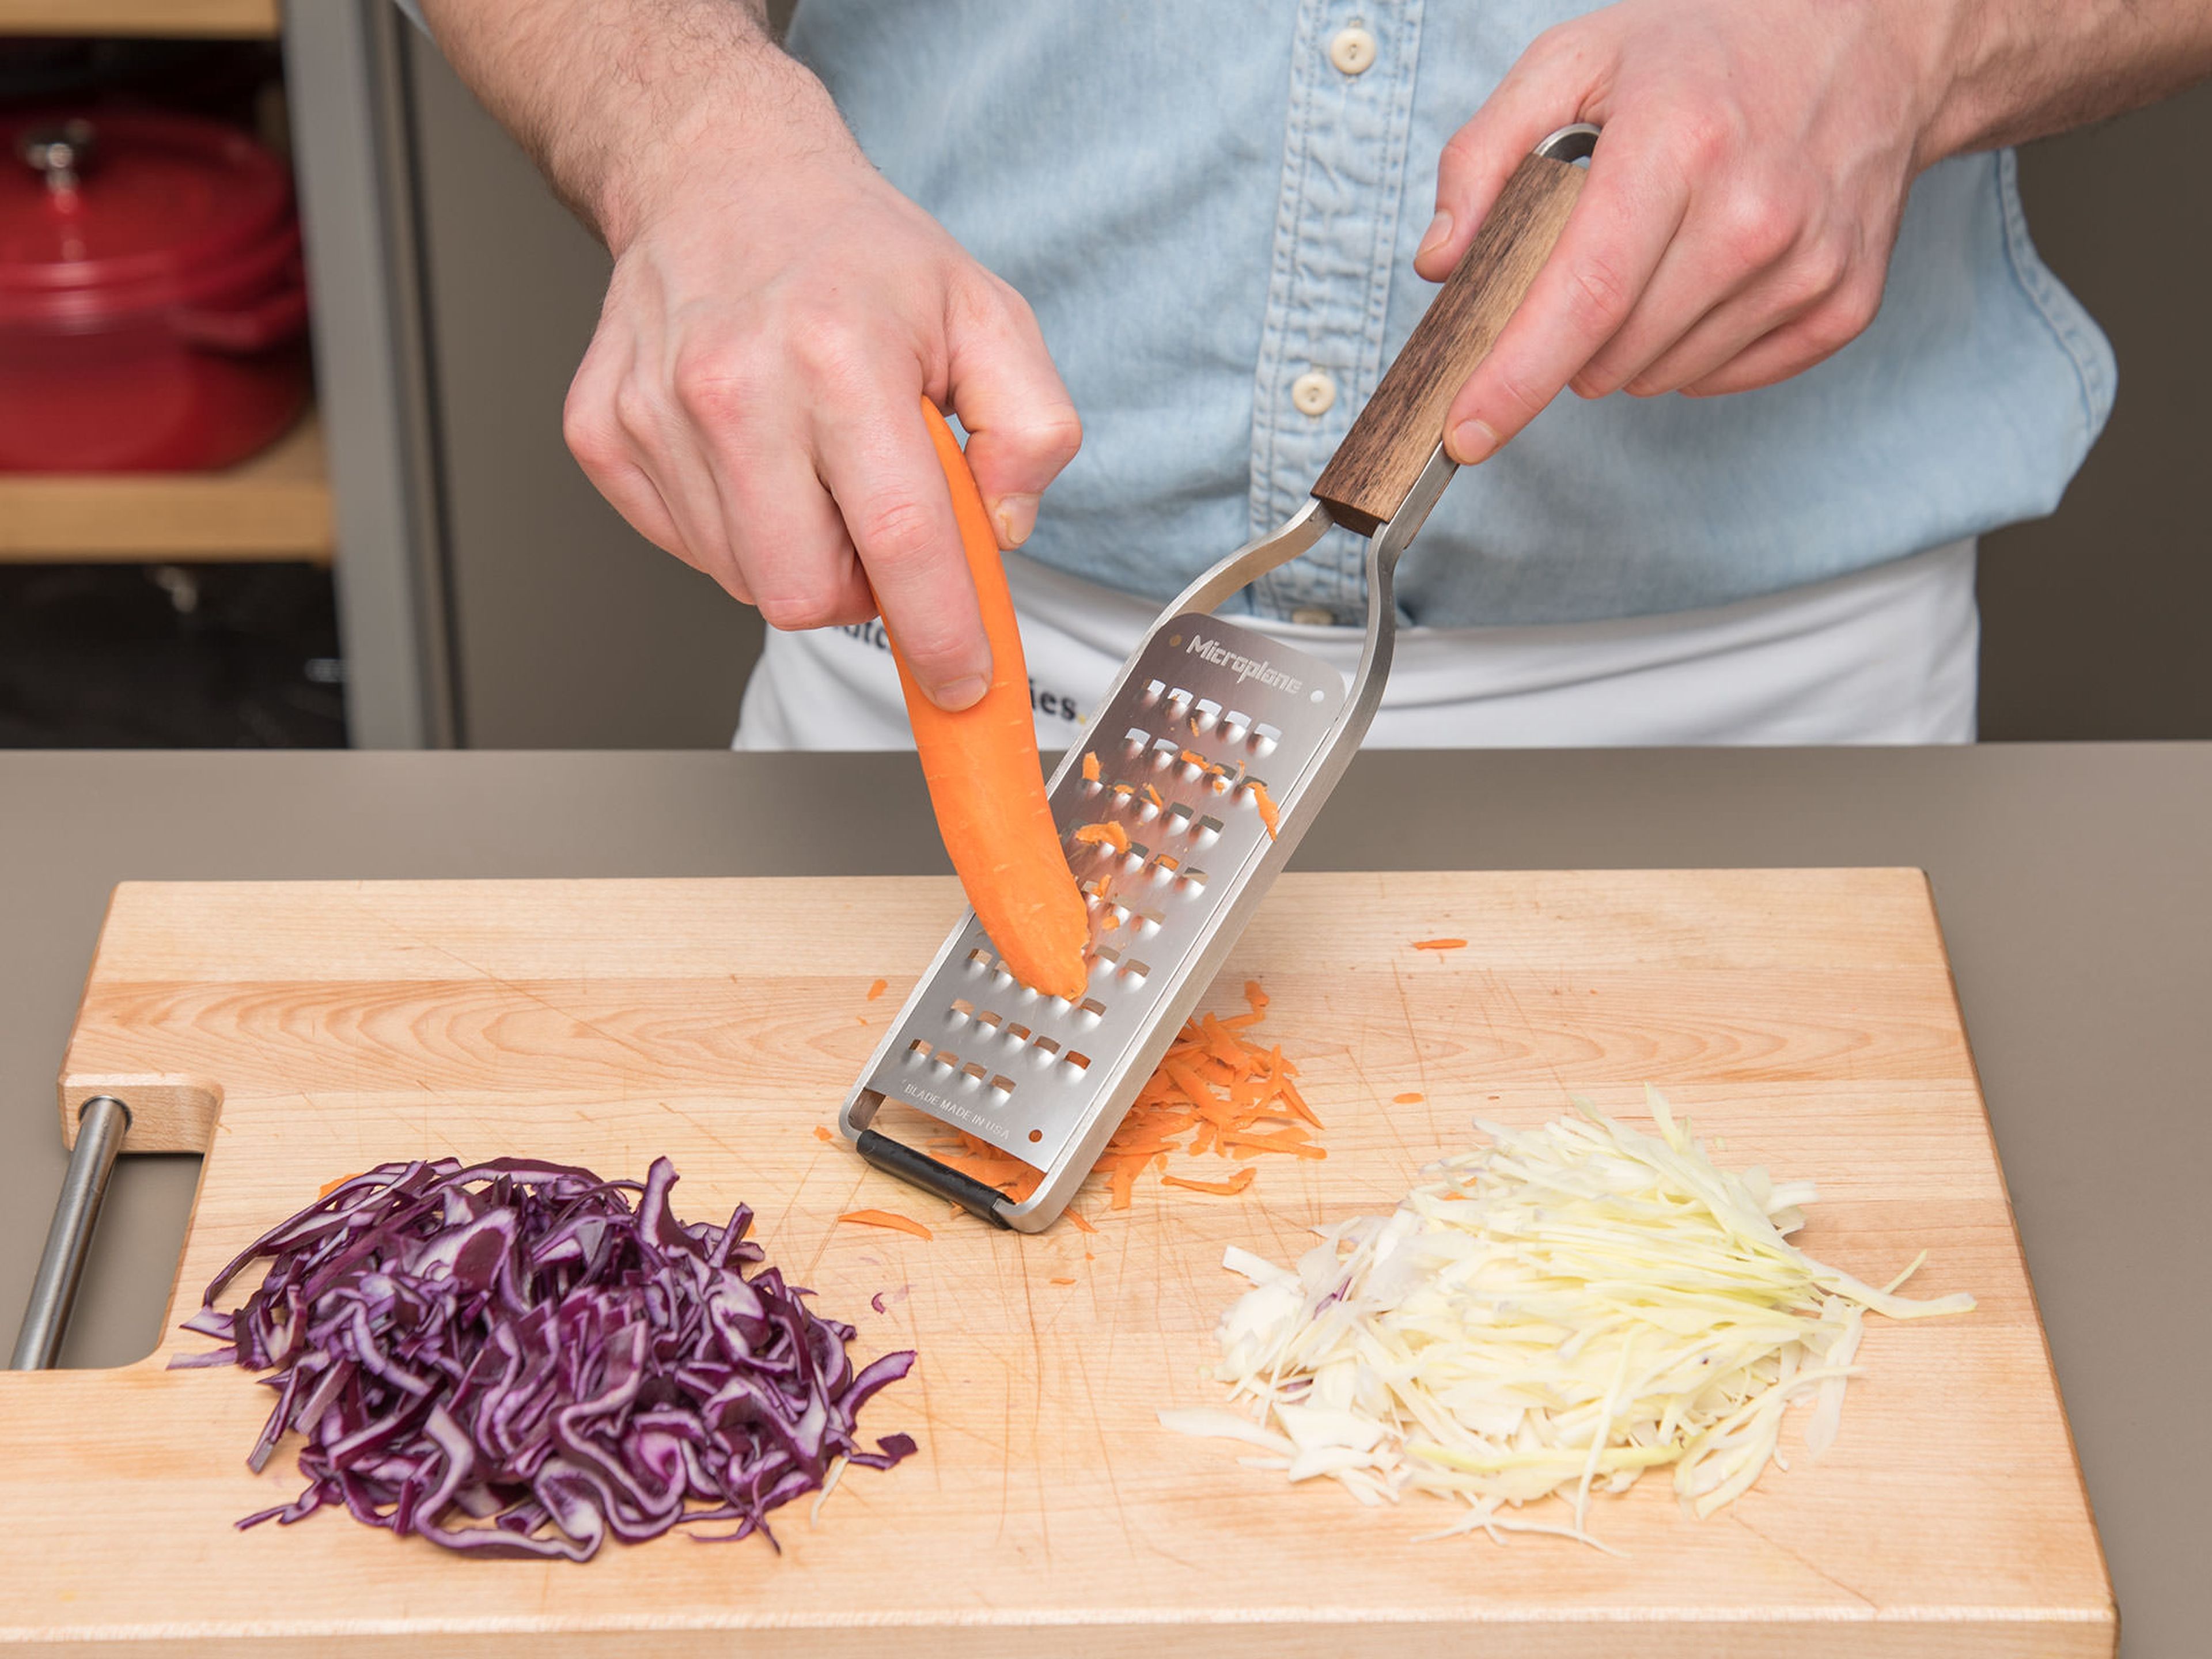 Finely slice red cabbage and white cabbage. Peel and roughly grate carrot. Transfer cut vegetables to a bowl and add olive oil, cider vinegar, and maple syrup. Toss to coat and season with salt and pepper to taste. Set coleslaw aside.